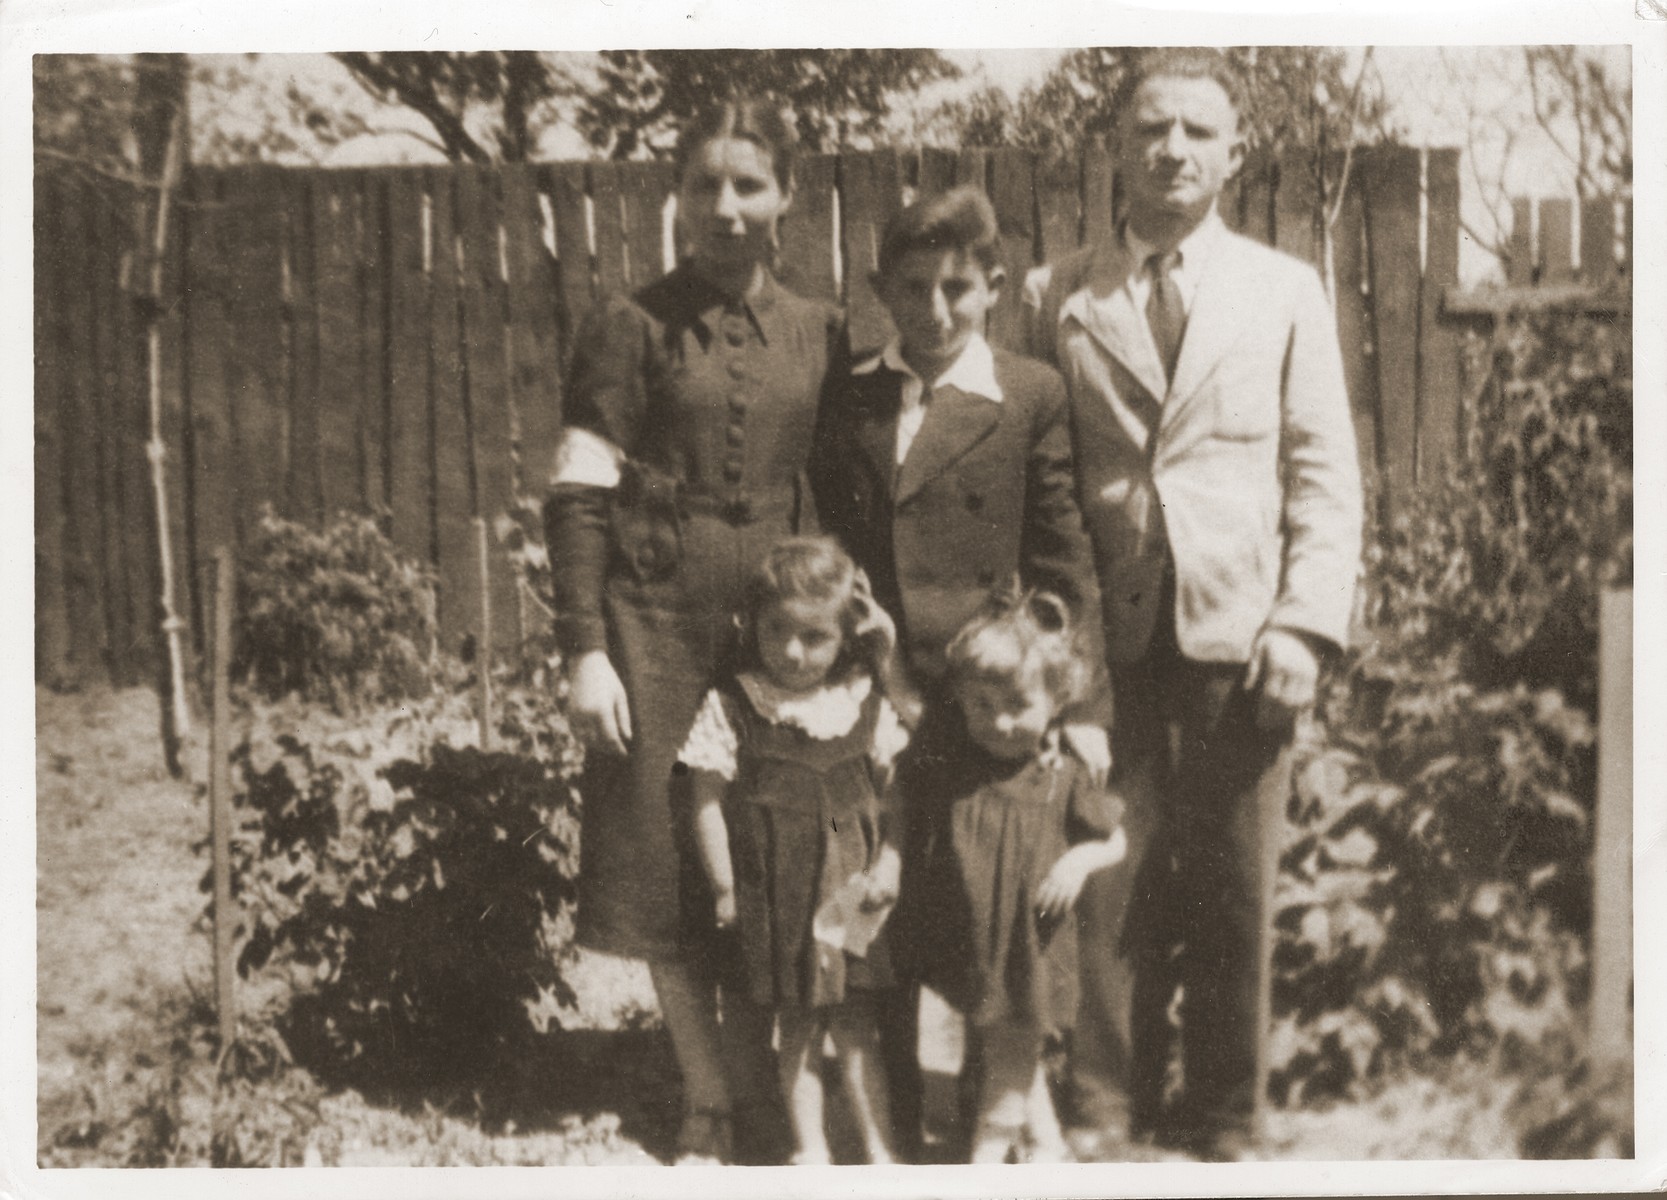 Portrait of the Shulman and Rothstein families in the Grodzisk Mazowiecki ghetto.

Pictured in the back row from left to right are: Sura Feiga (Shulman) Rothstein, Luzer Shulman, Abraham Shulman.  In the front row are Chana and Liba Rothstein.